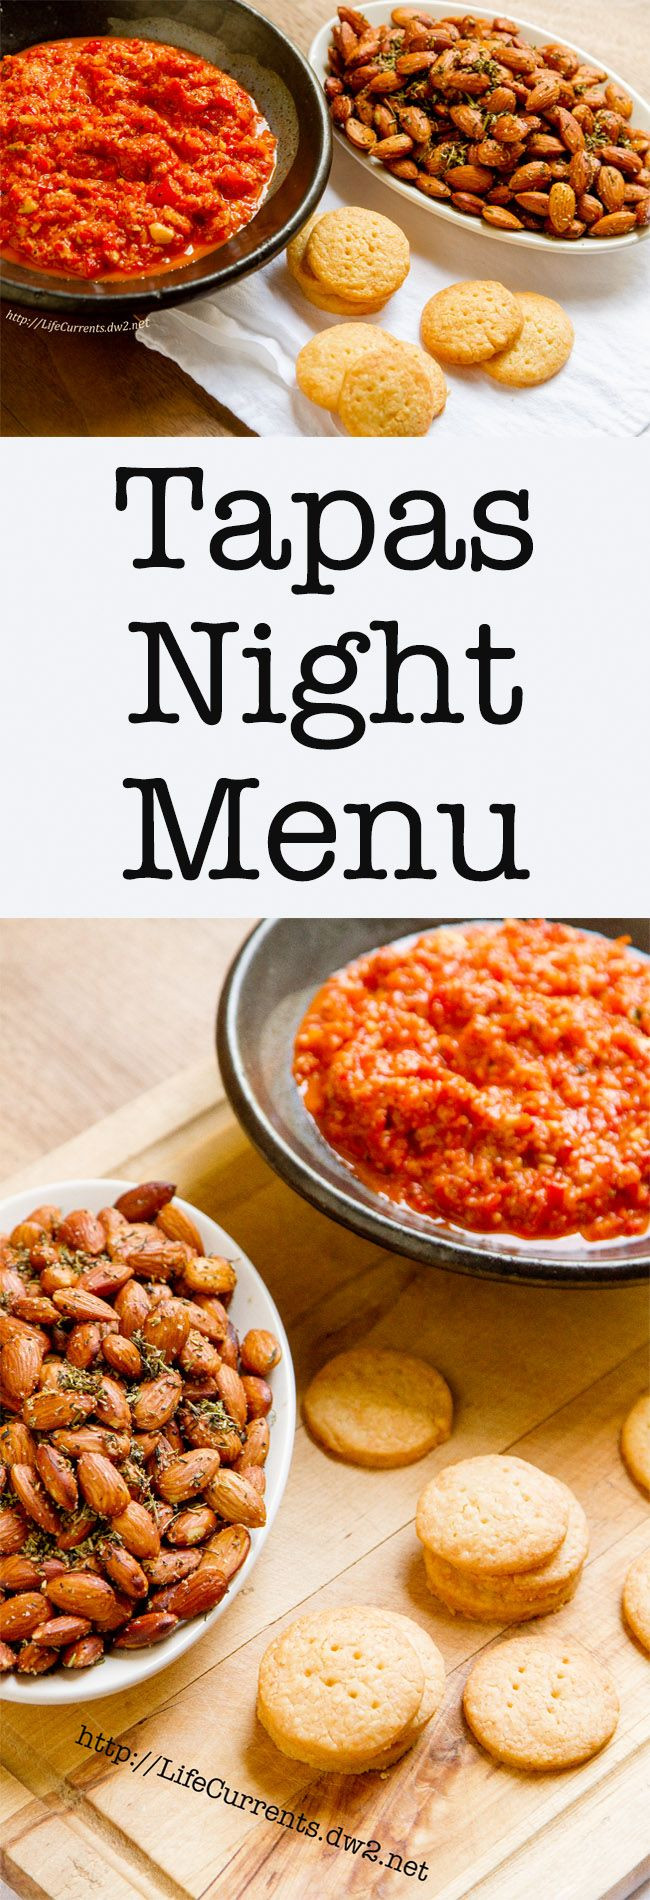 Spanish Food Ideas For A Party
 Tapas Night Menu more than 25 GREAT recipes for Tapas